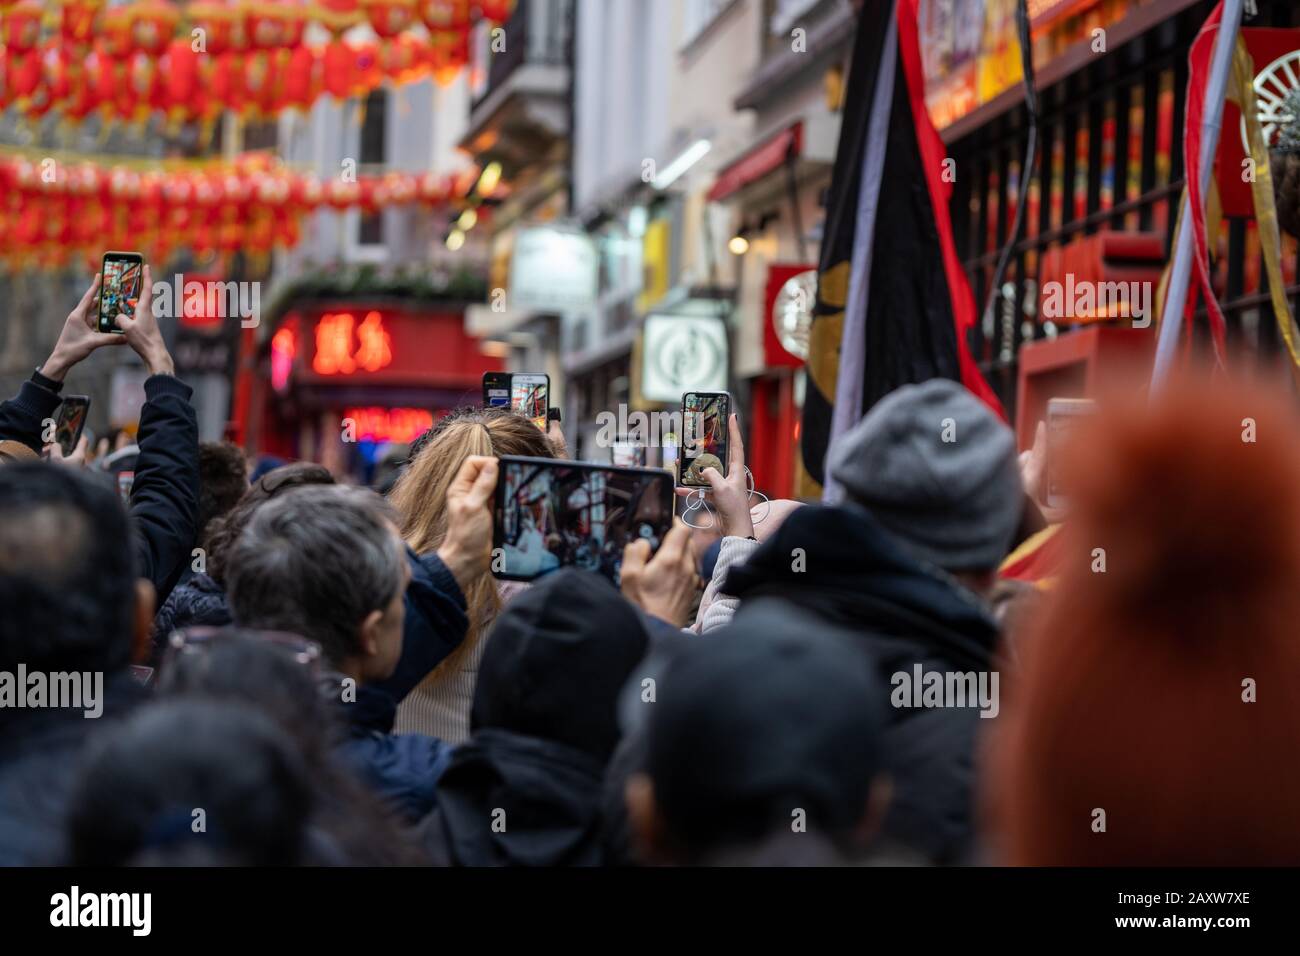 people on the street taking photographs with their smartphone during the chinese new year Stock Photo